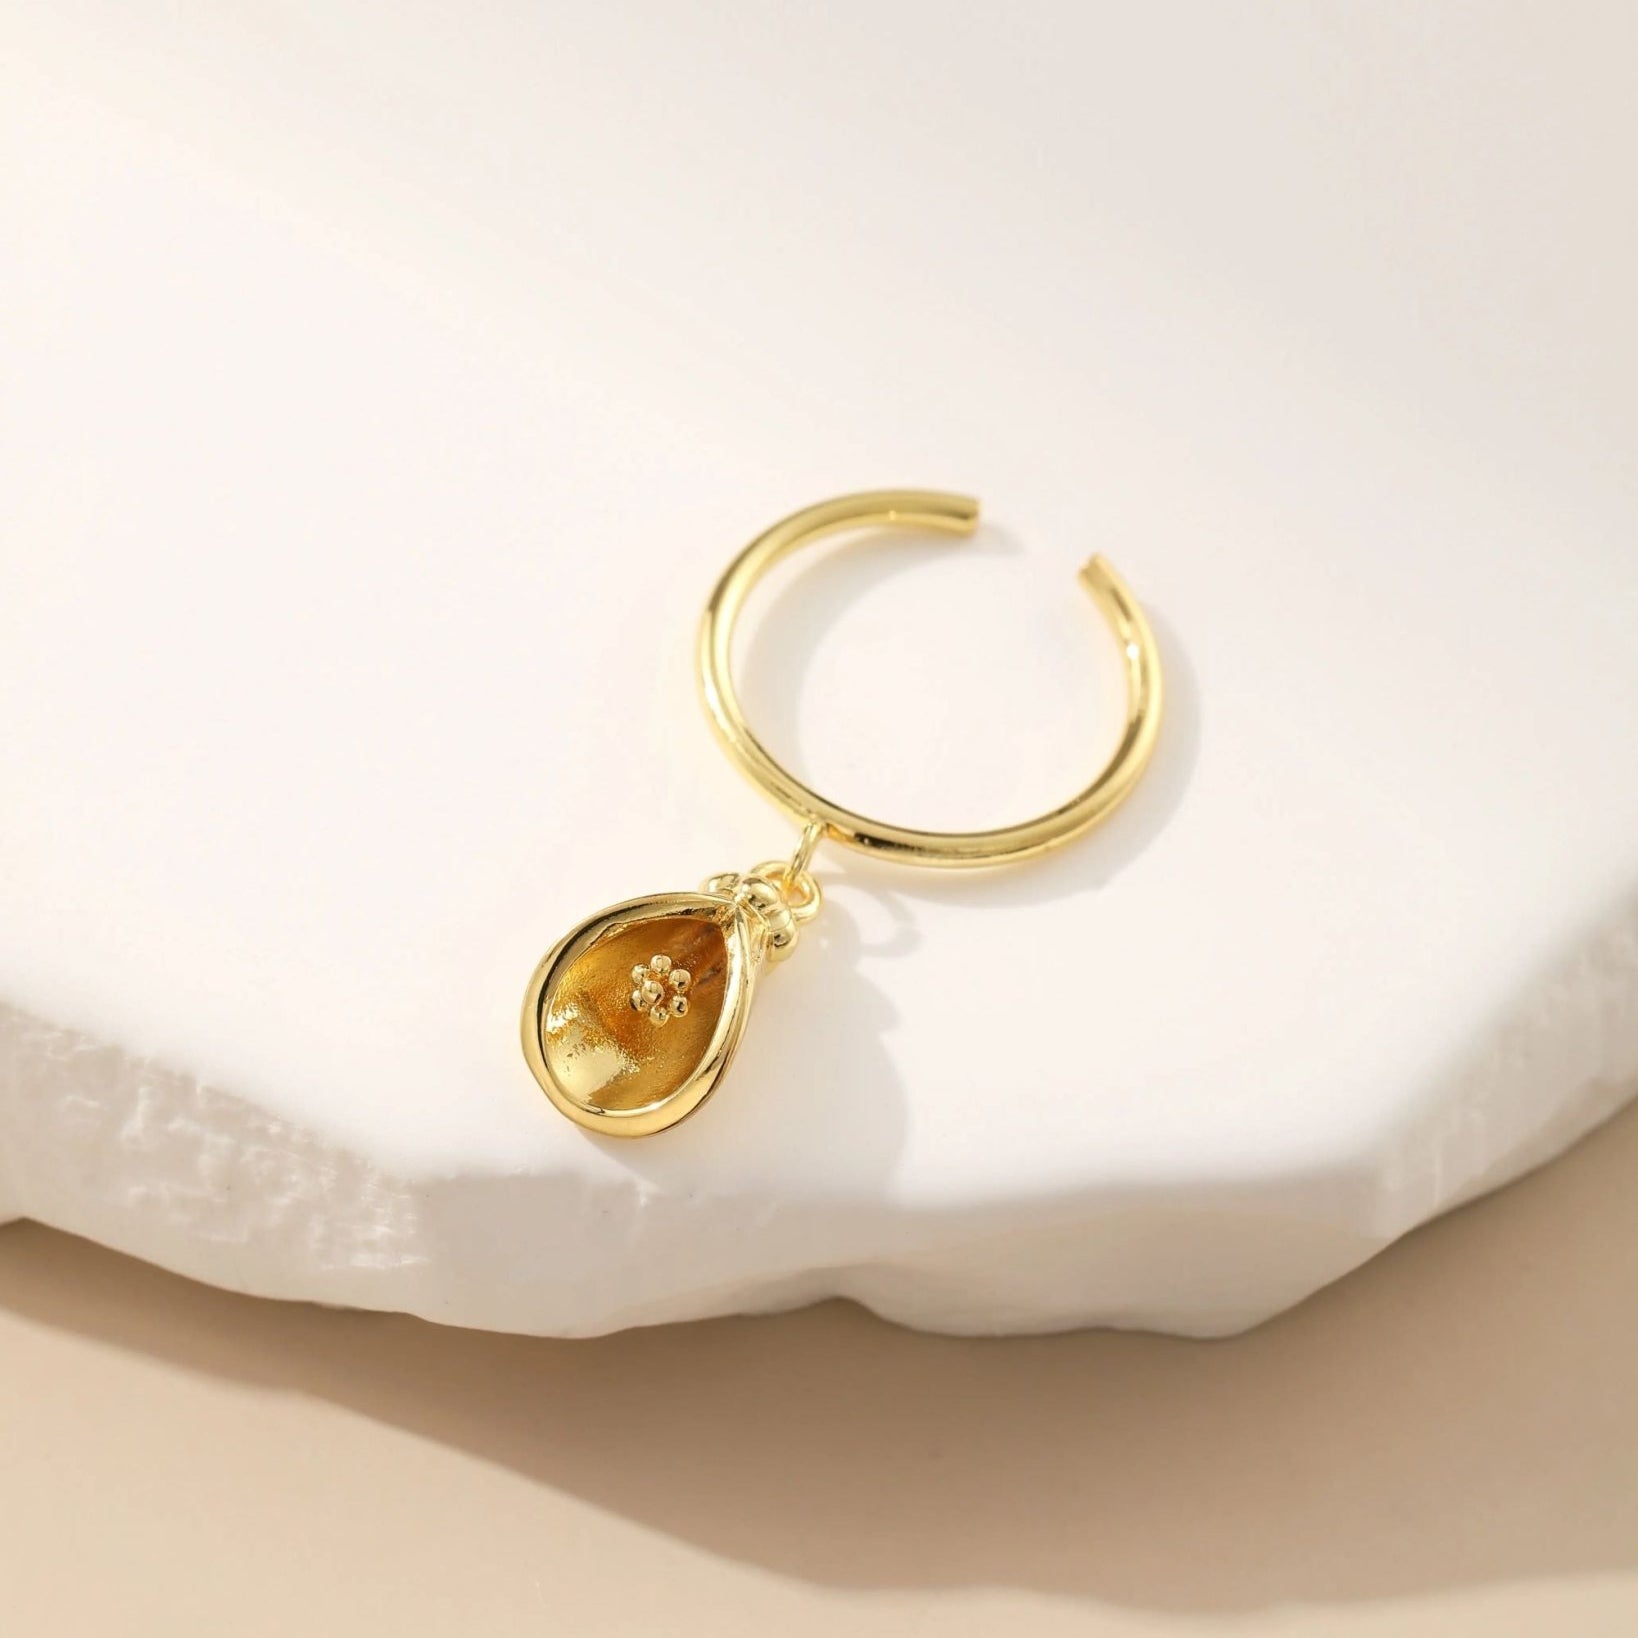 Gold-Finish Metal and Topaz with Lacquer Ring - Alarita